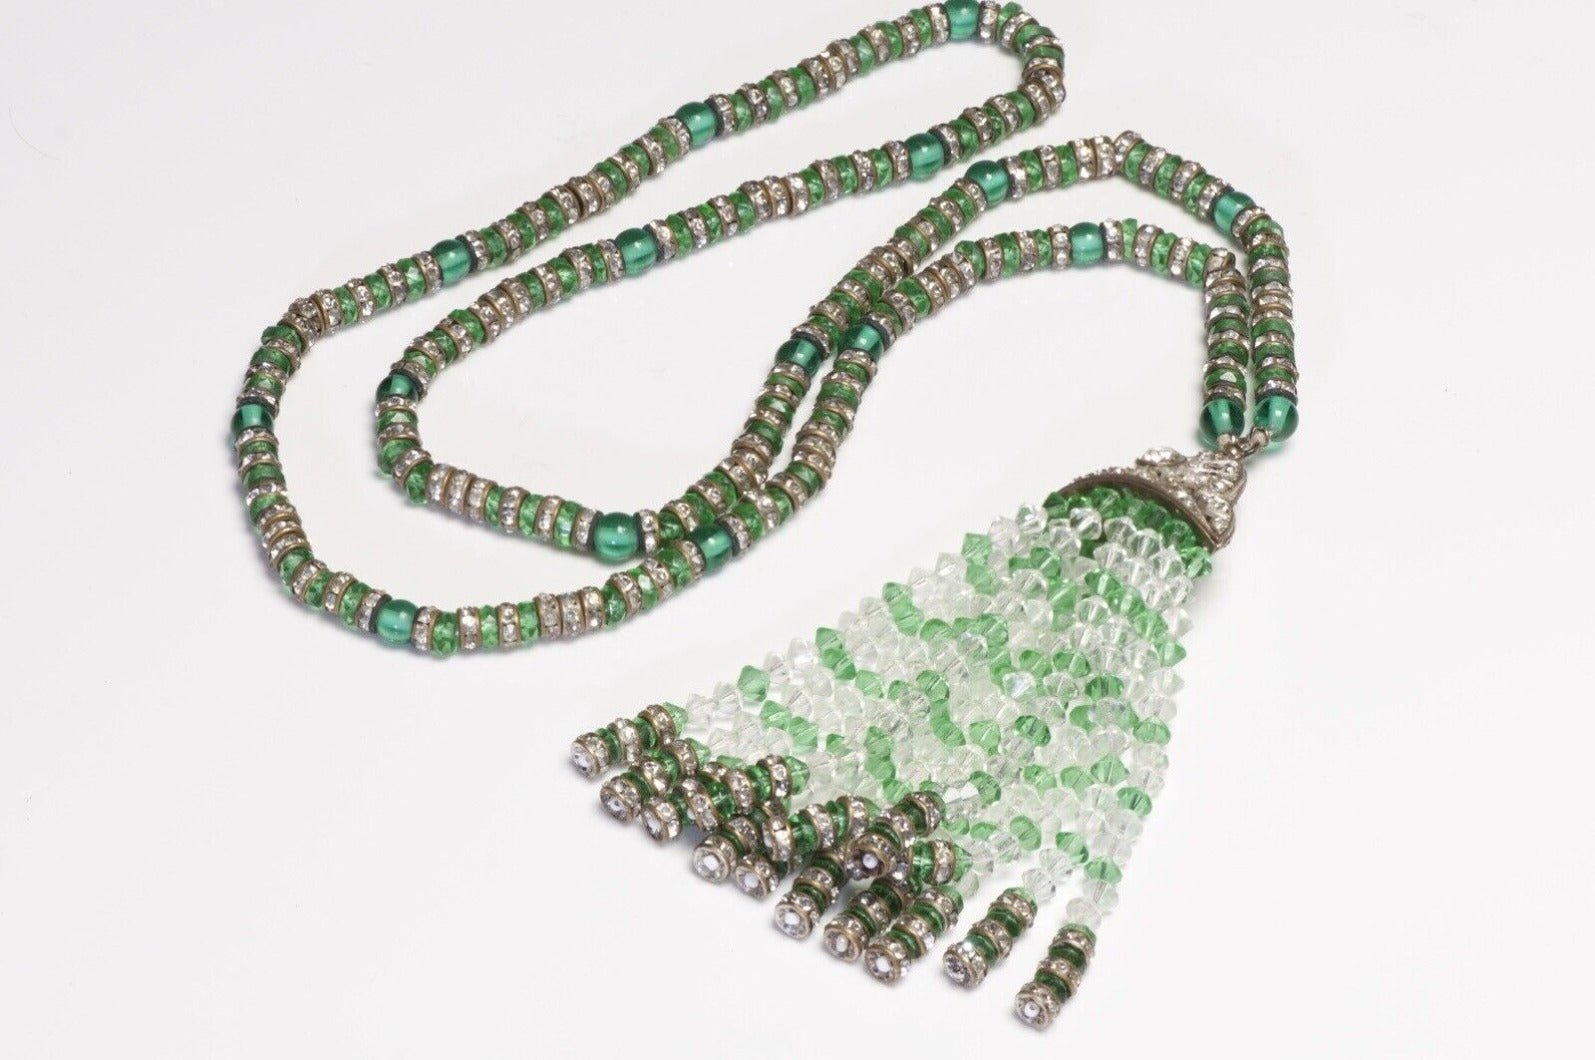 Vintage 1950’s Art Deco Style Green Glass Beads Crystal Tassel Flapper Necklace